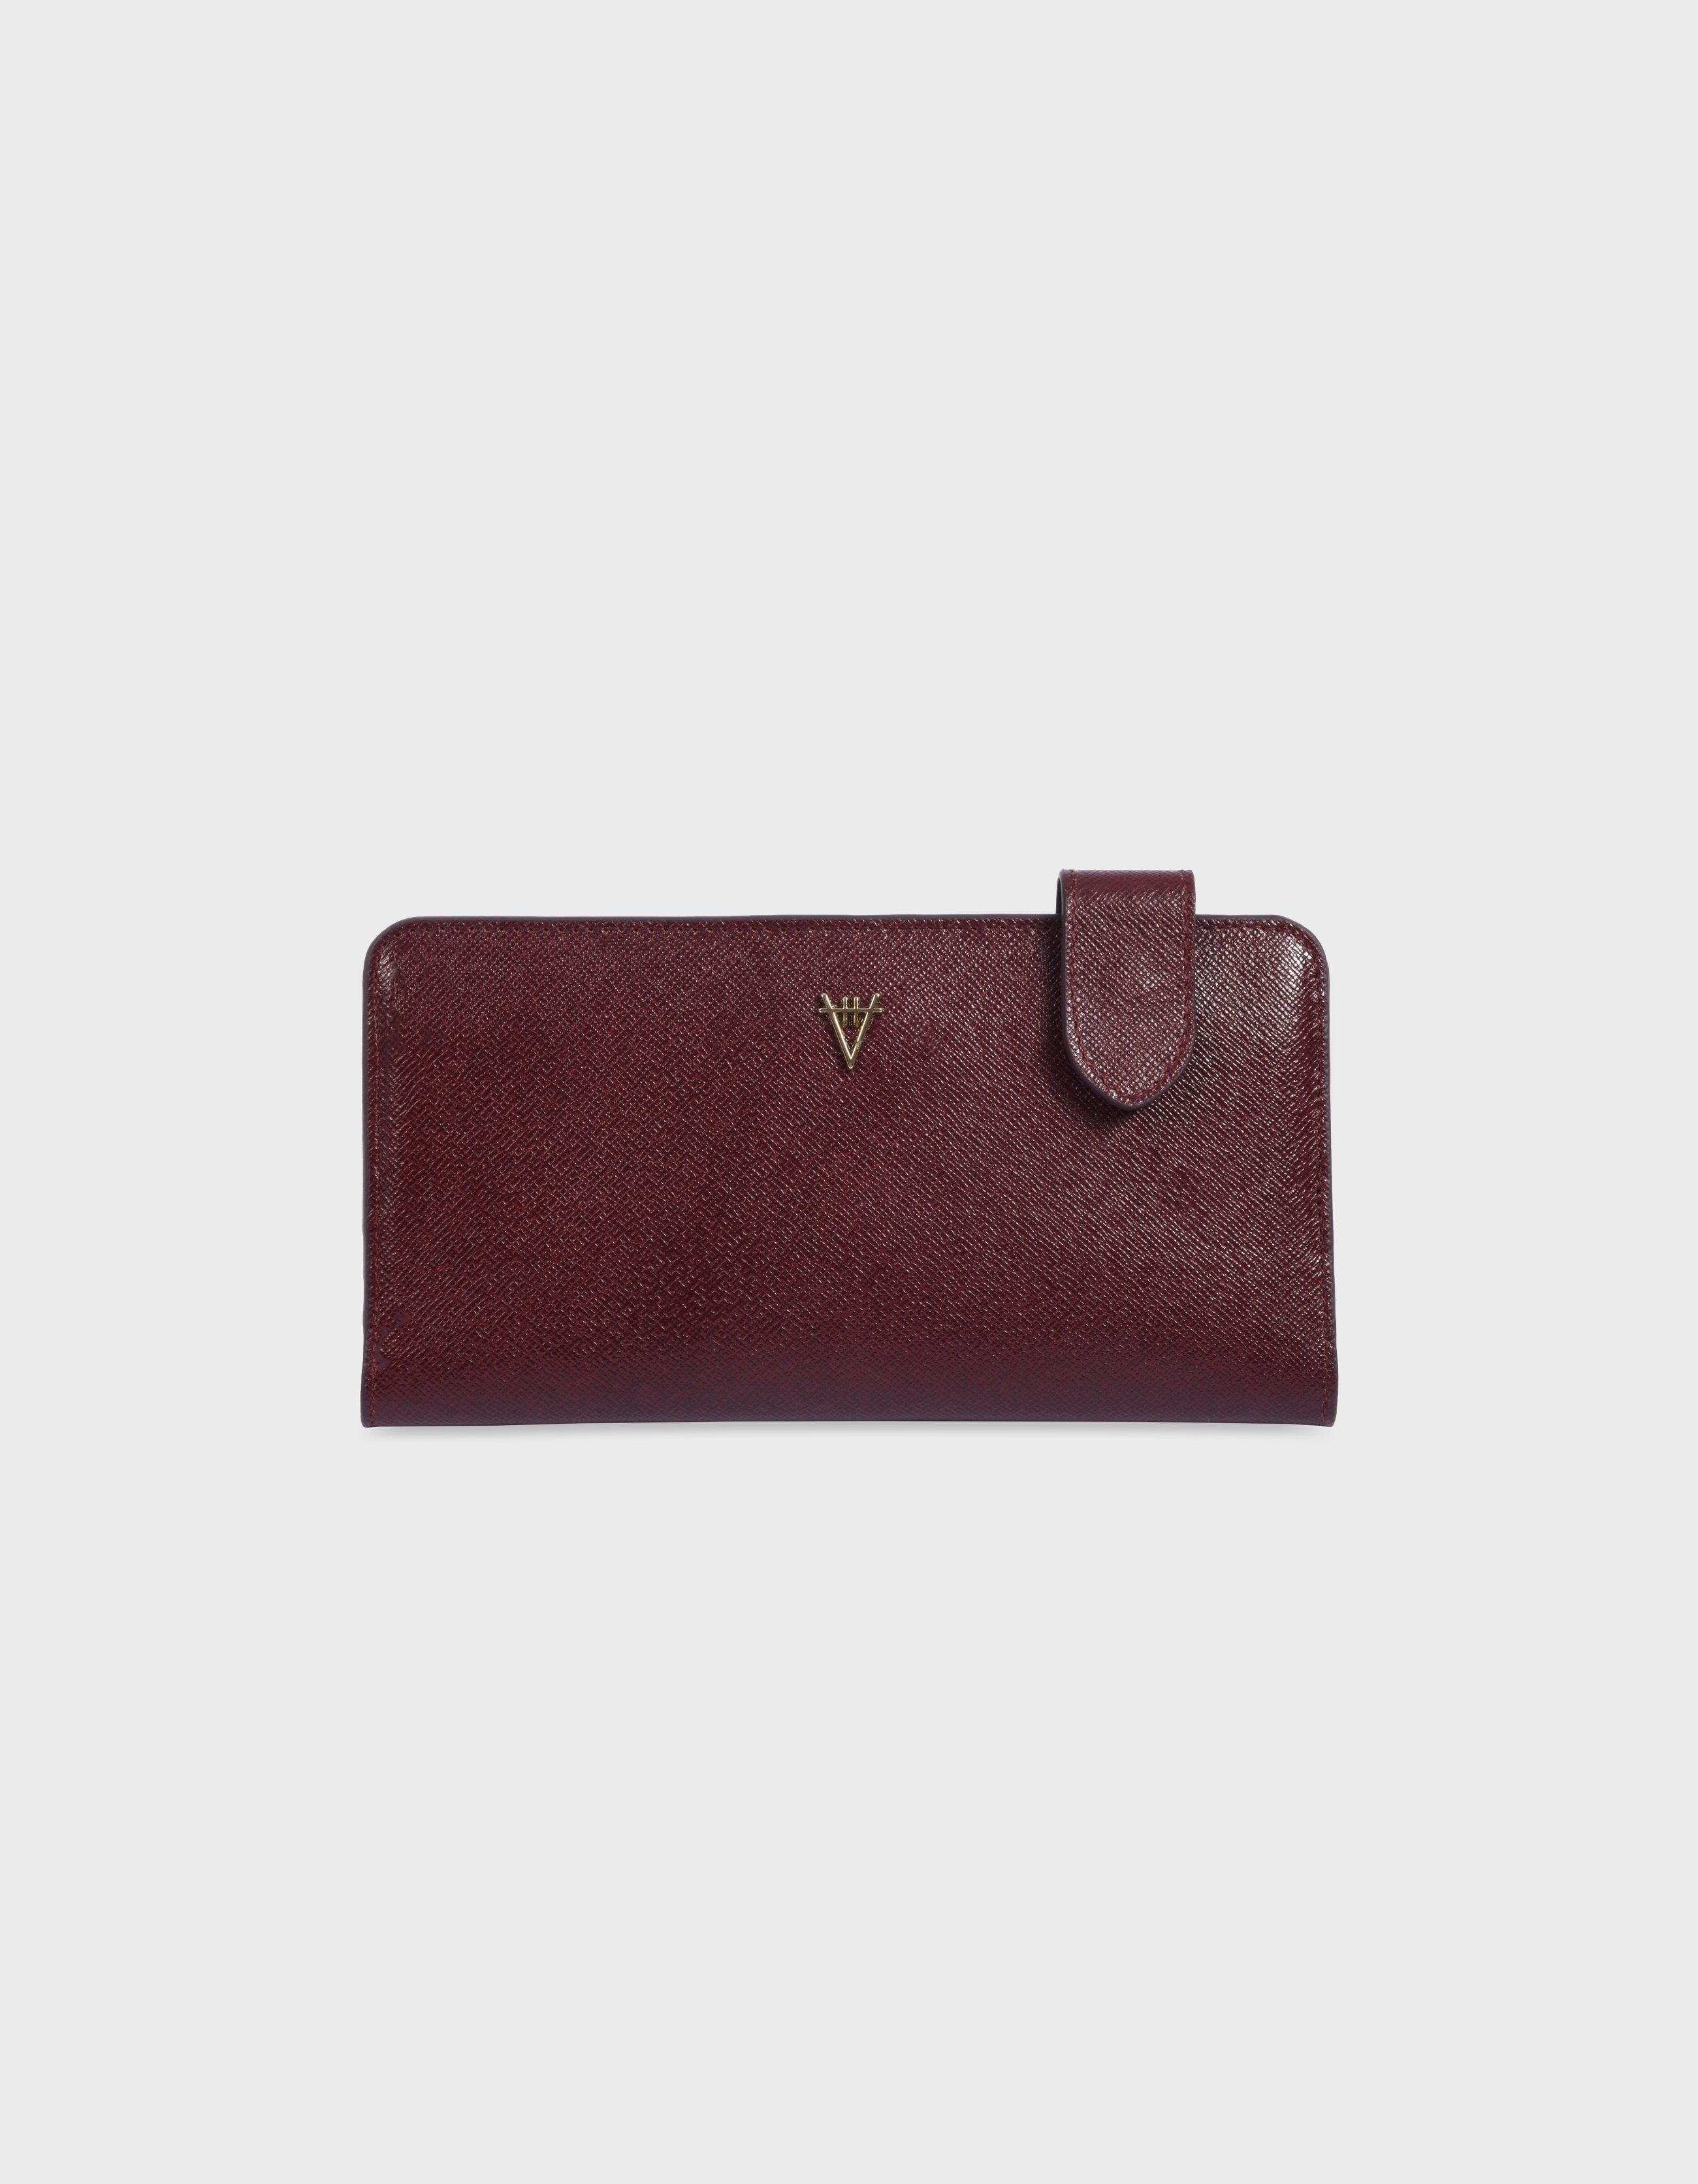 Fluctus Long Wallet - Finest Quality HiVa Atelier GmbH Leather Accessories